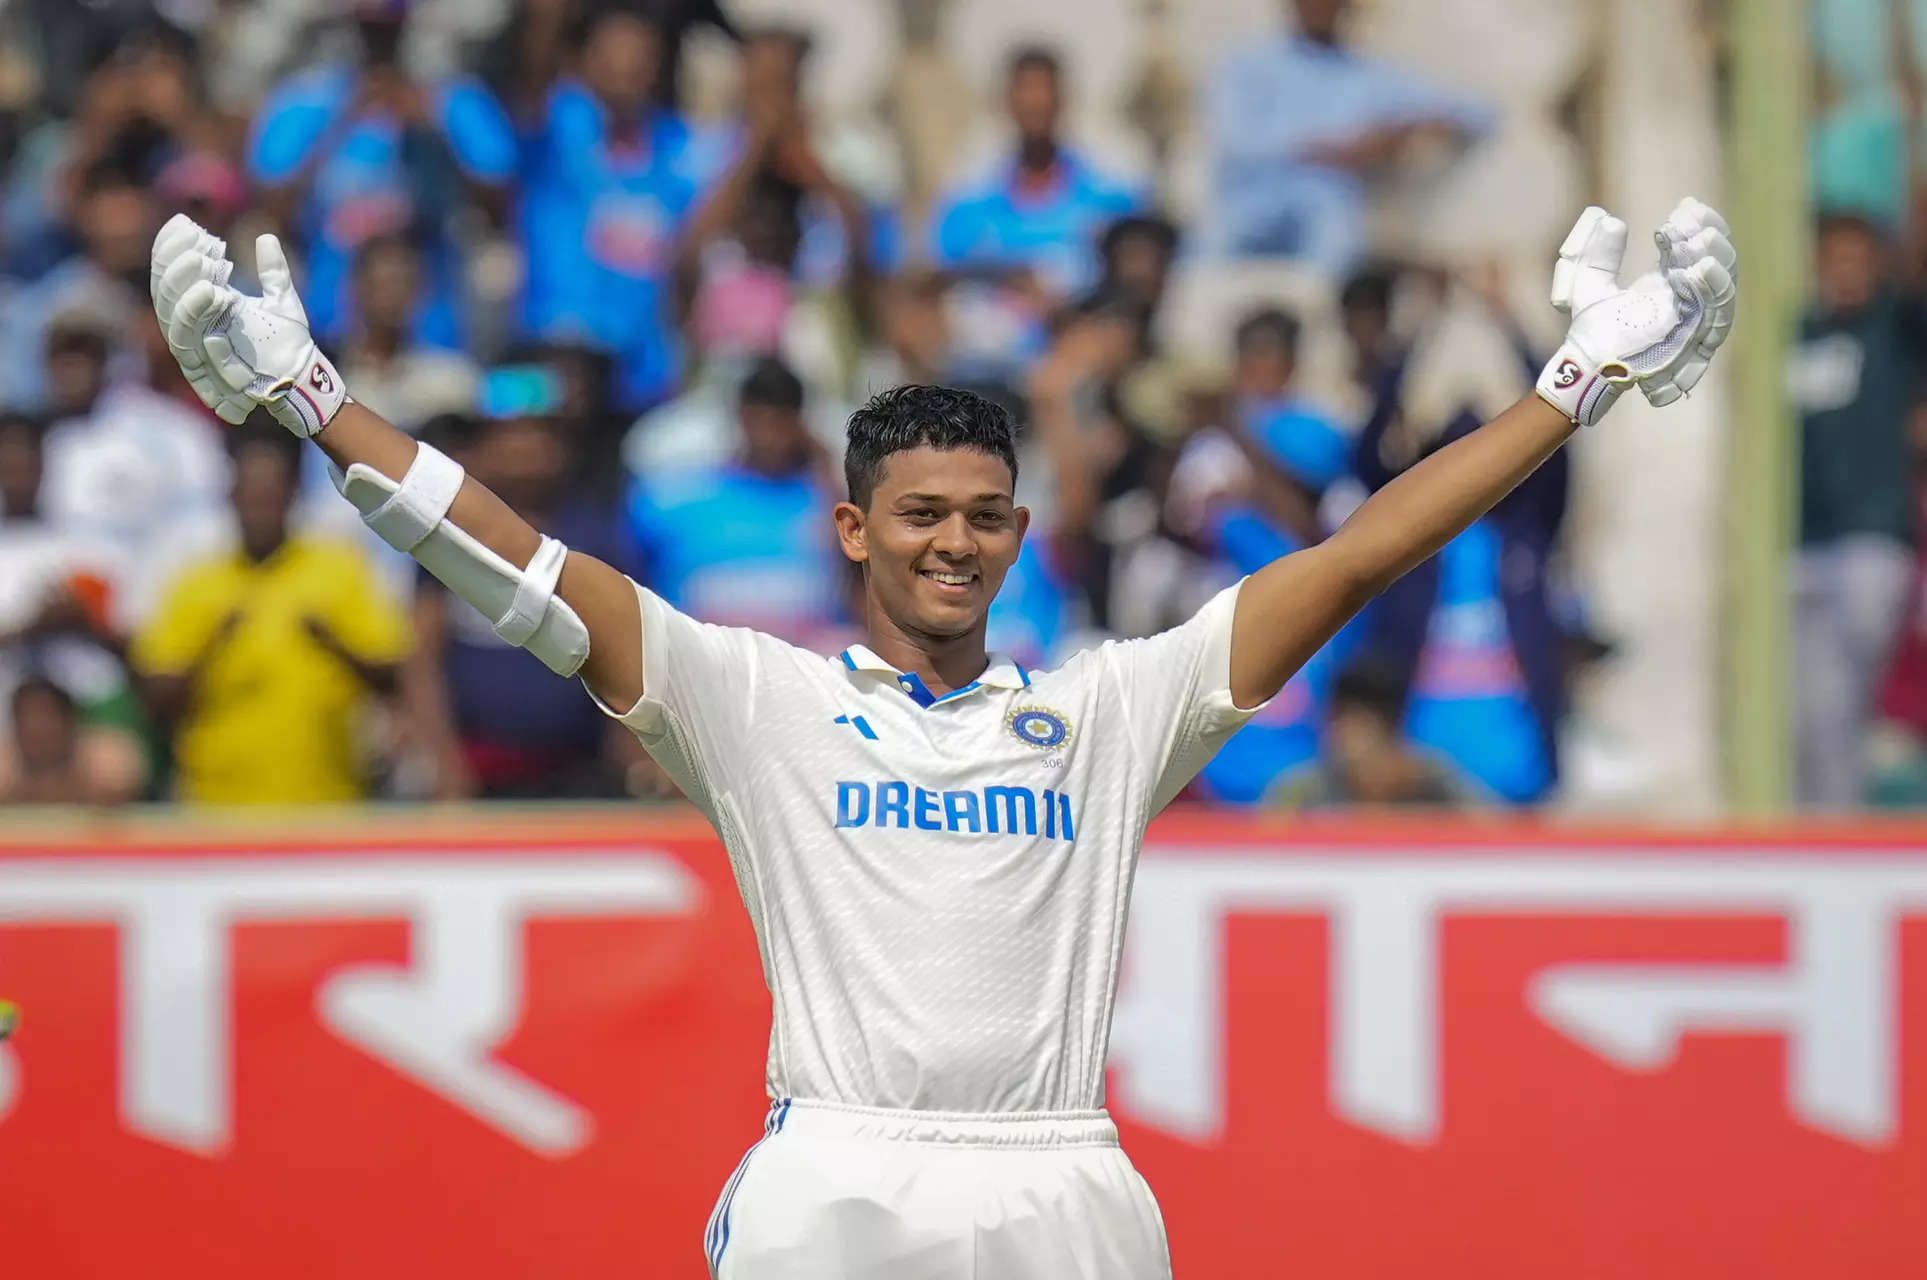 Yashasvi Jaiswal celebrates his century during the first day of the second Test. (PTI Photo)